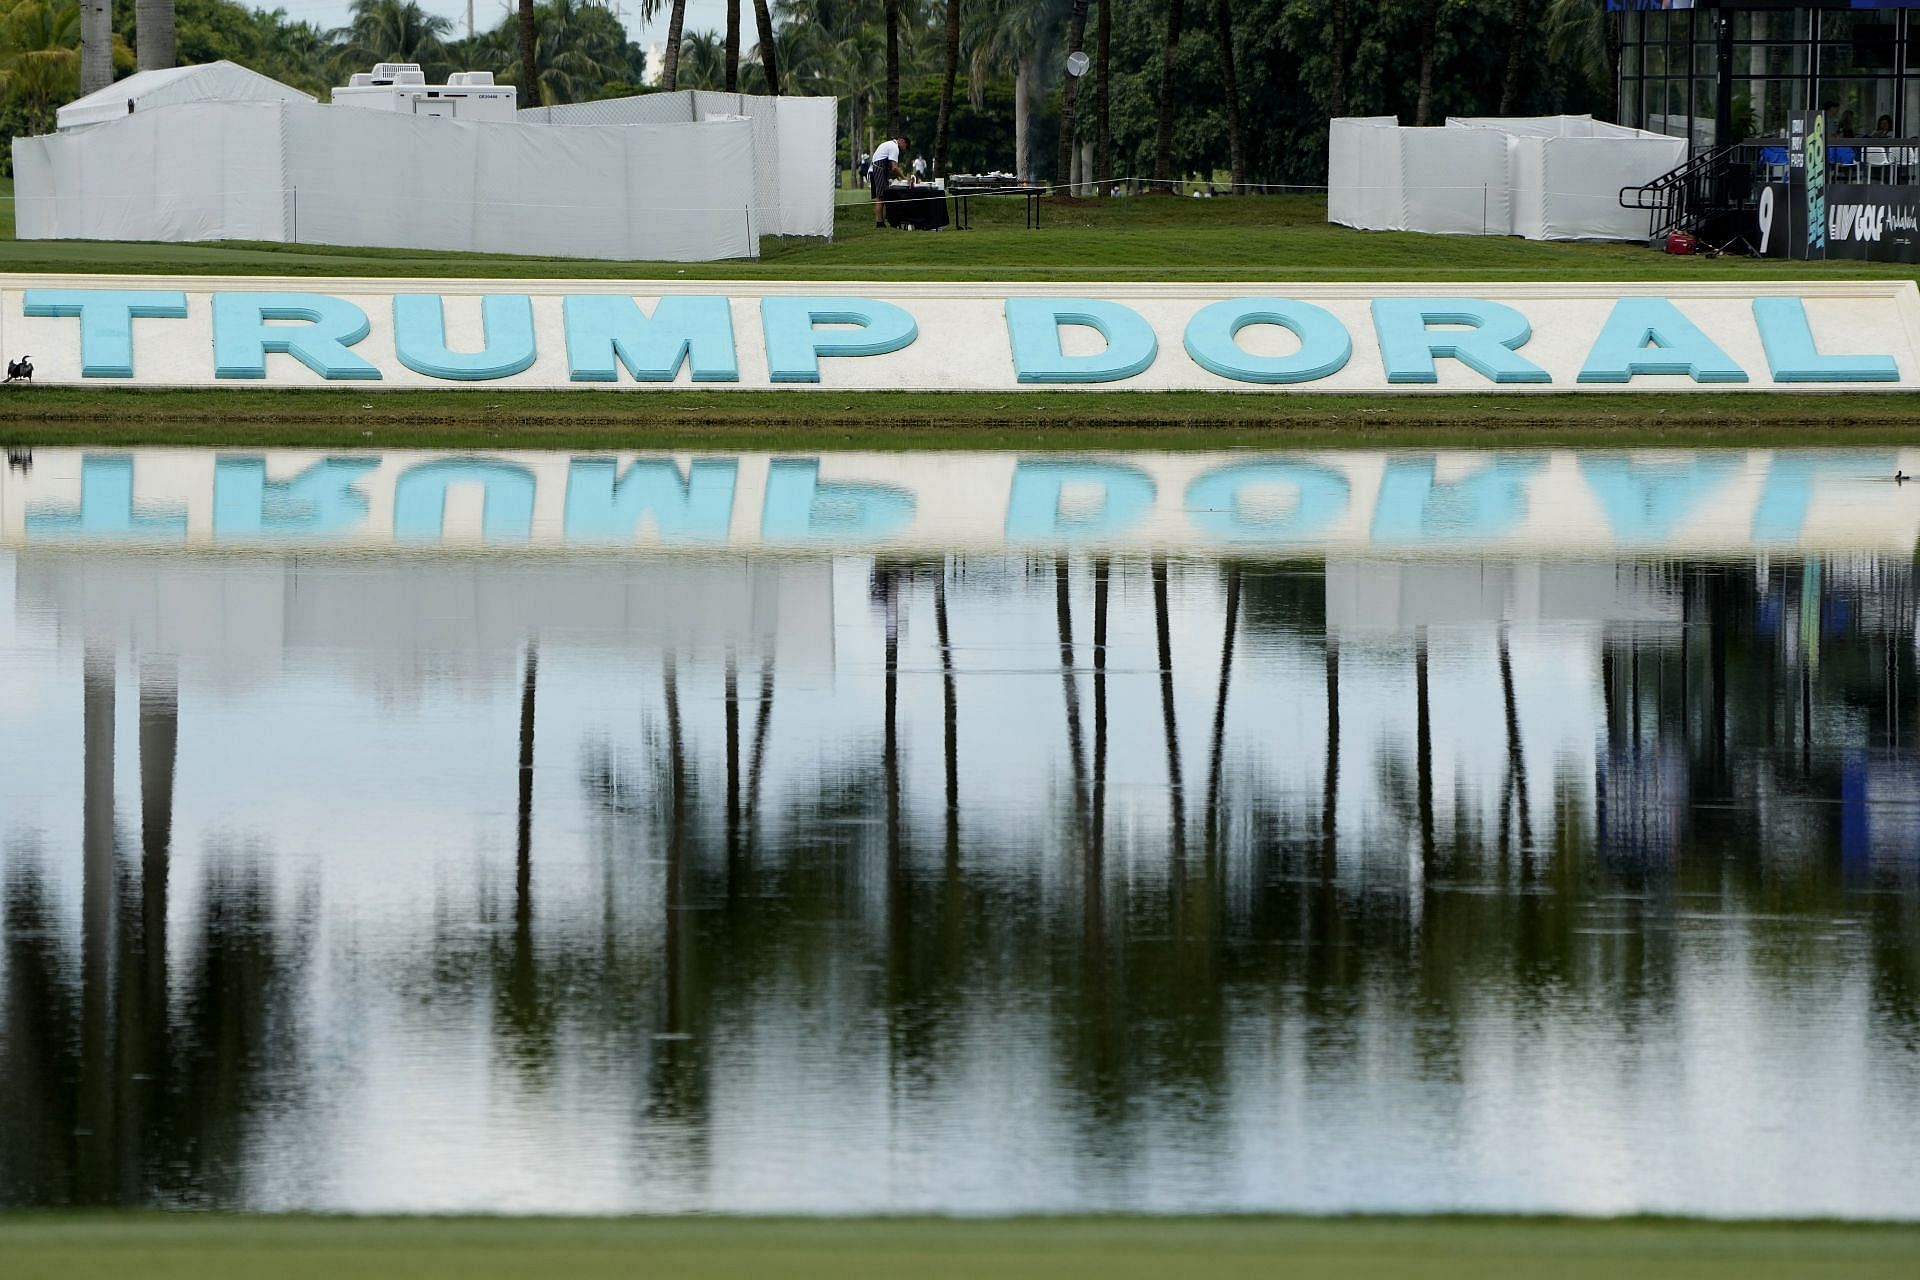 A Trump Doral sign is reflected in the water at the LIV Golf Team Championship at the Trump National Doral golf club, Friday, Oct. 20, 2023 (AP Photo/Lynne Sladky)